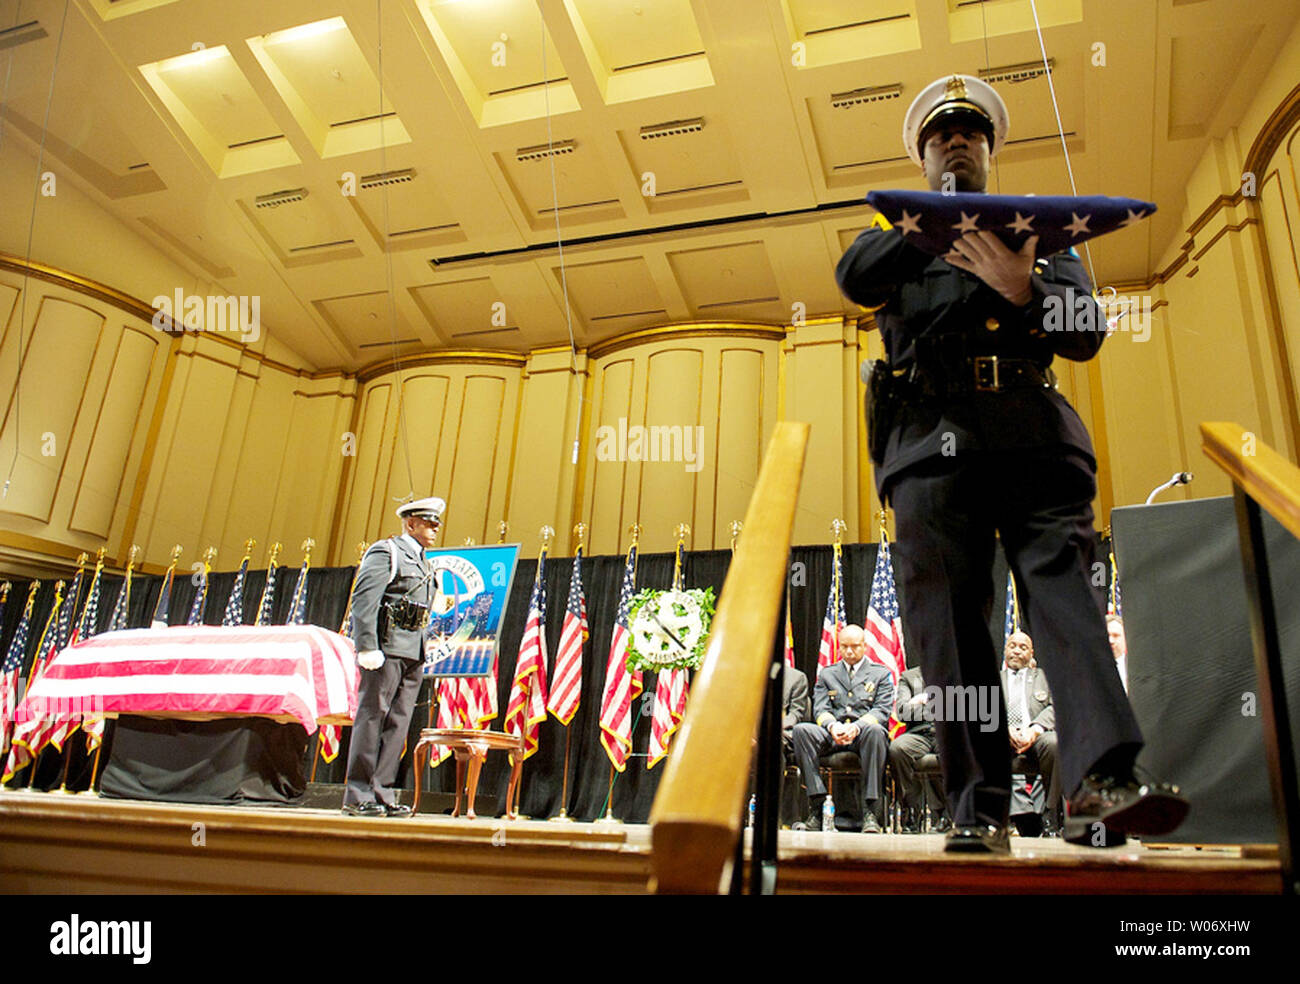 A member of the St. Louis Police Department Honor Guard prepares to deliver an American flag to the family of Deputy US Marshal John Perry during a memorial service at Powell Symphony Hall in St. Louis on March 13, 2011. Perry, 48,  died March 13 from gunshot wounds while serving an arrest warrant at a house. UPI/Shane T. McCoy /US Marshals Stock Photo